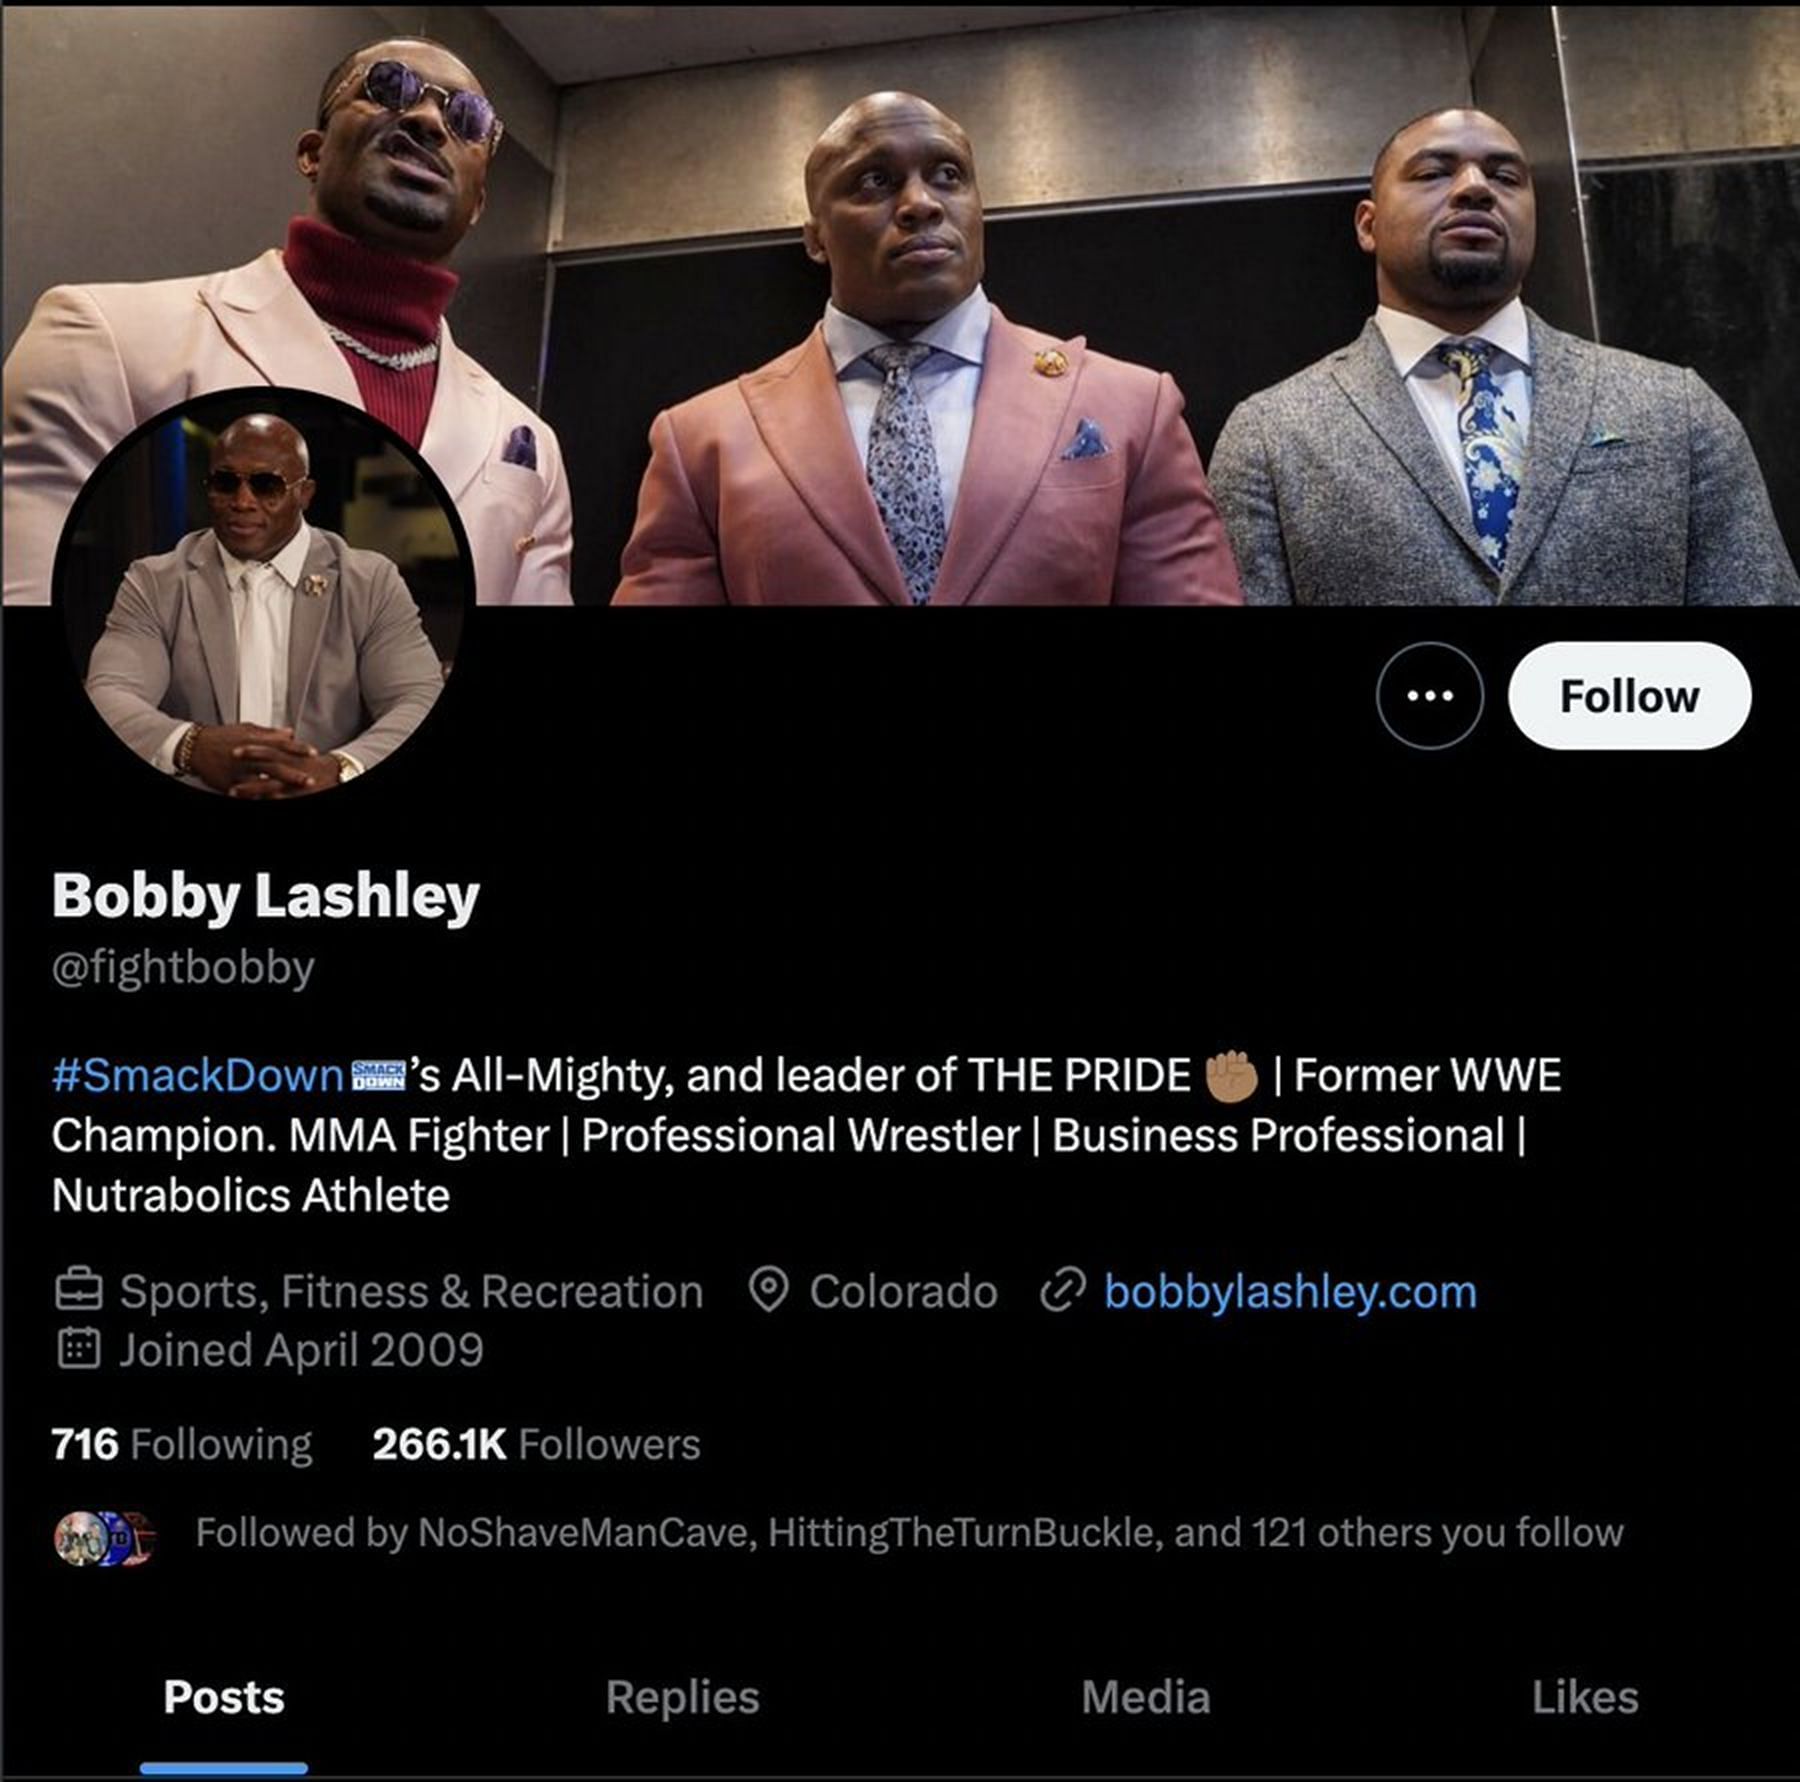 Lashley appears to have taken back the new name